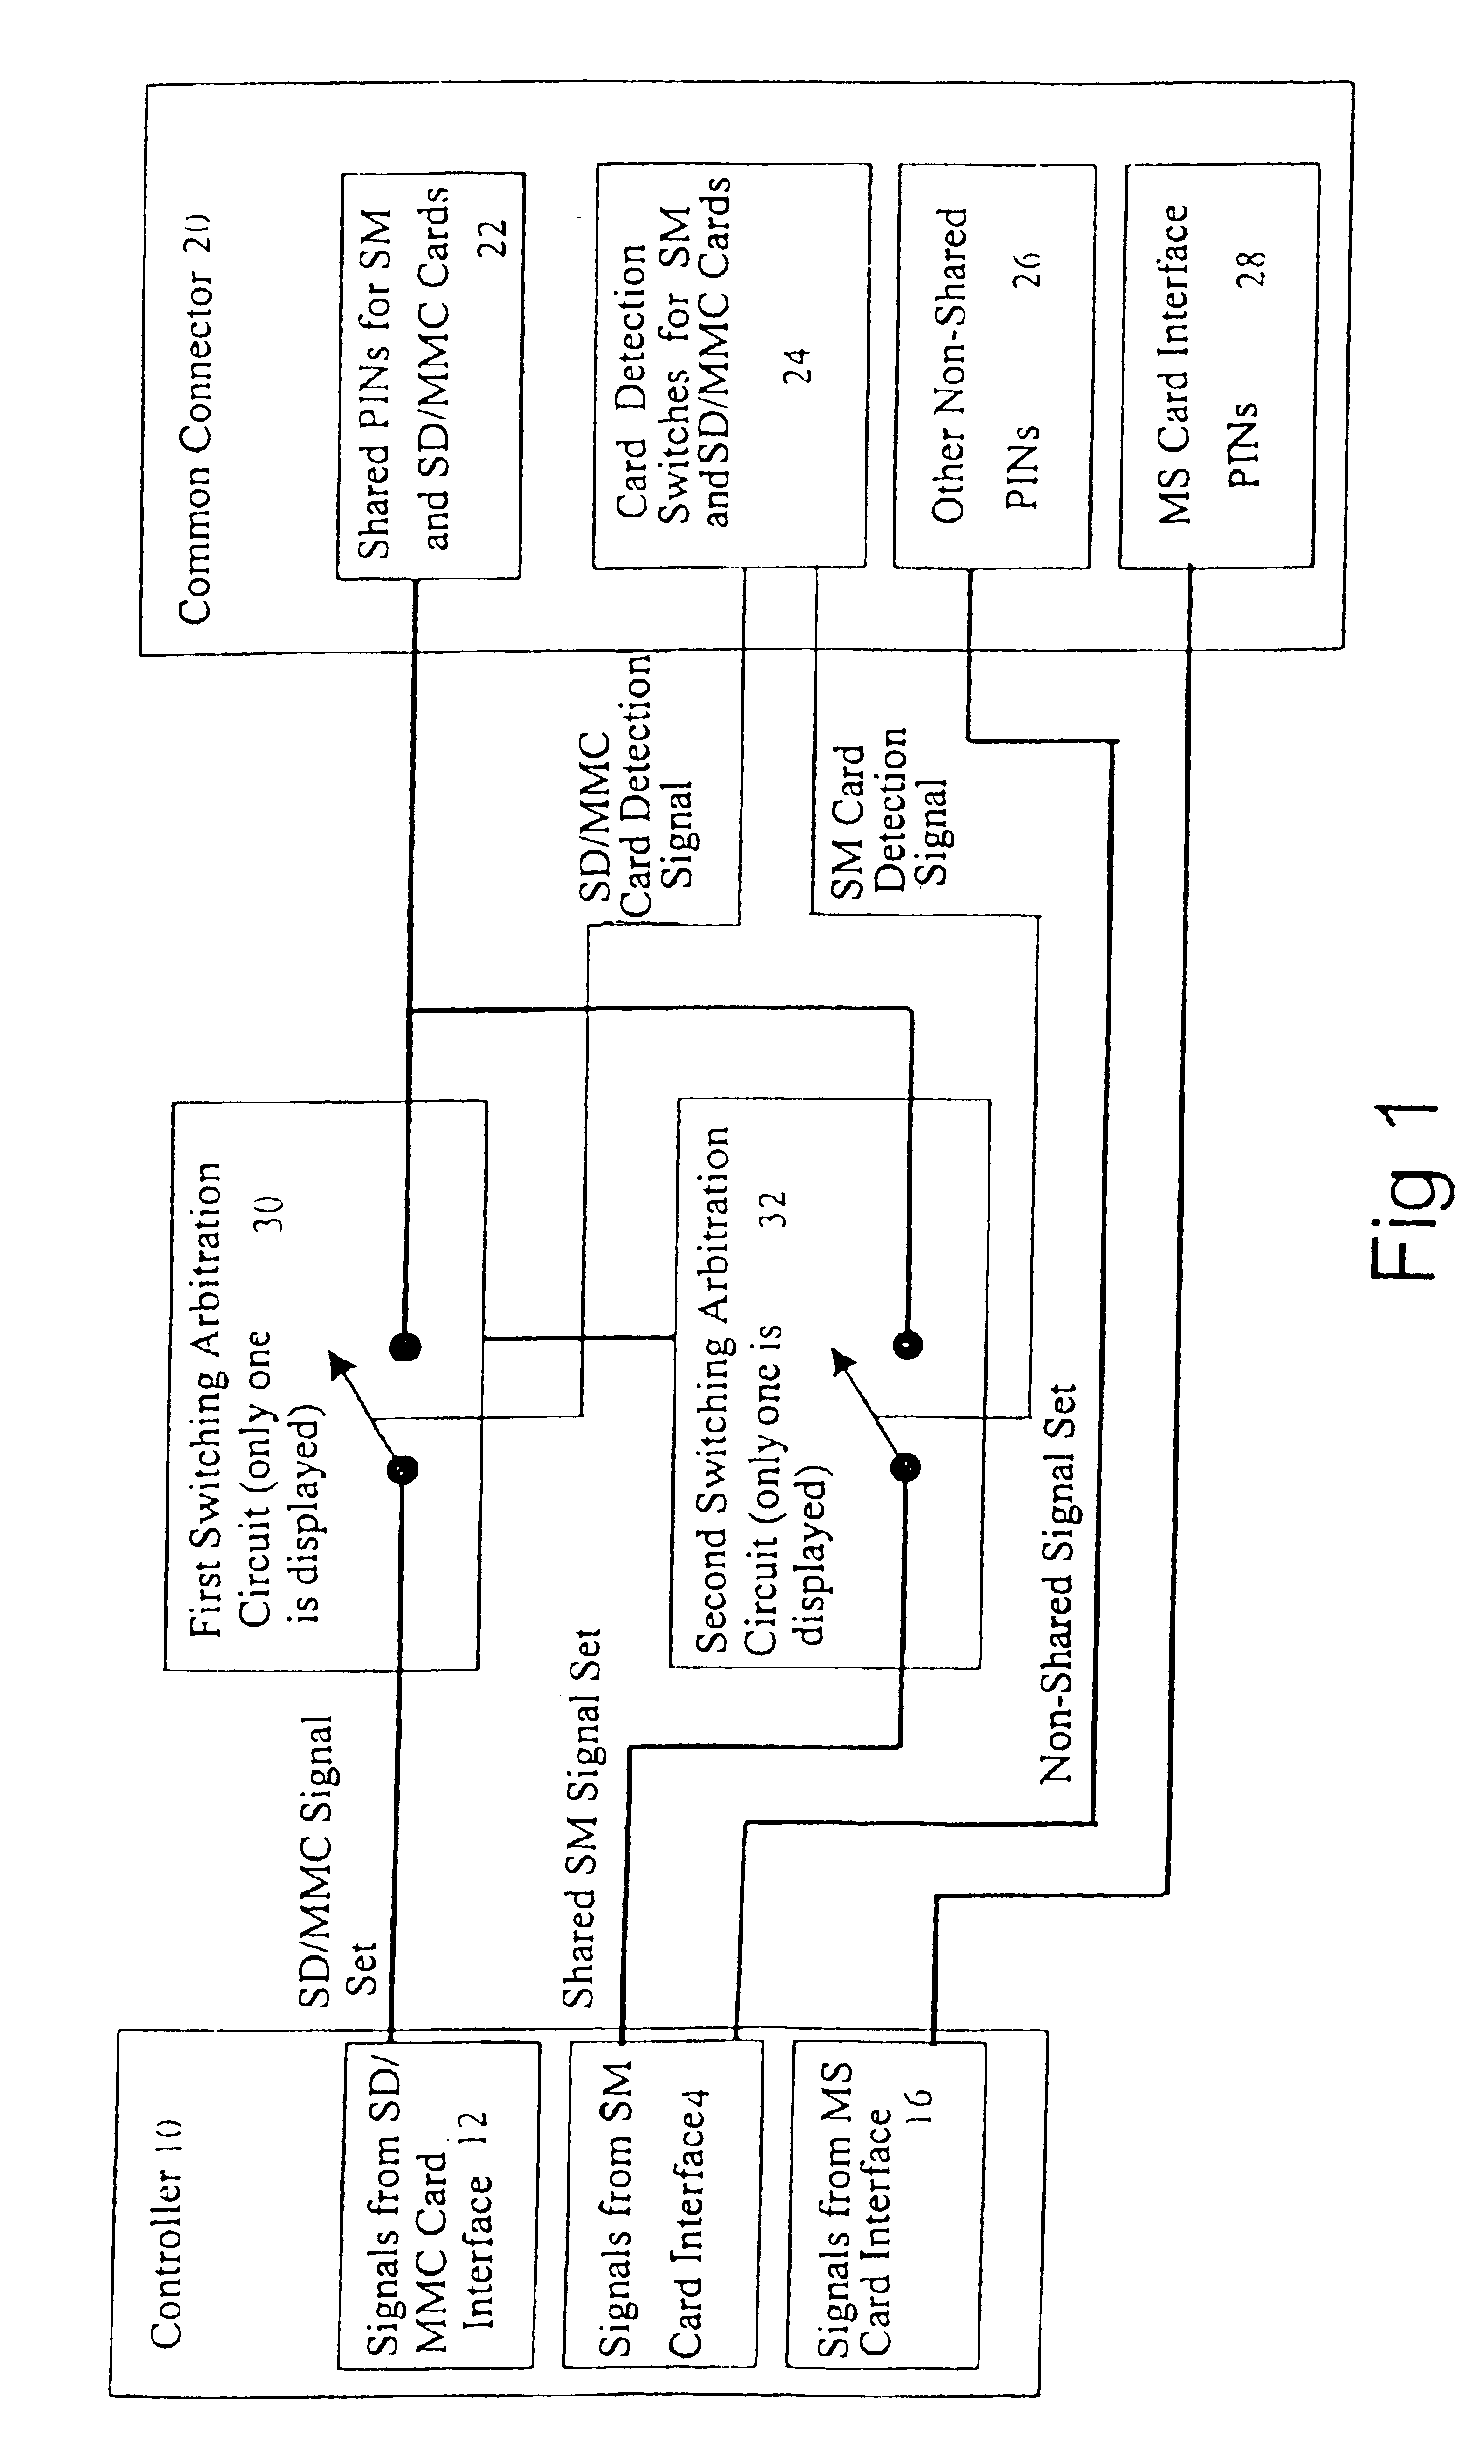 Common connector for memory cards and switching arbitration method for shared pins of a connector